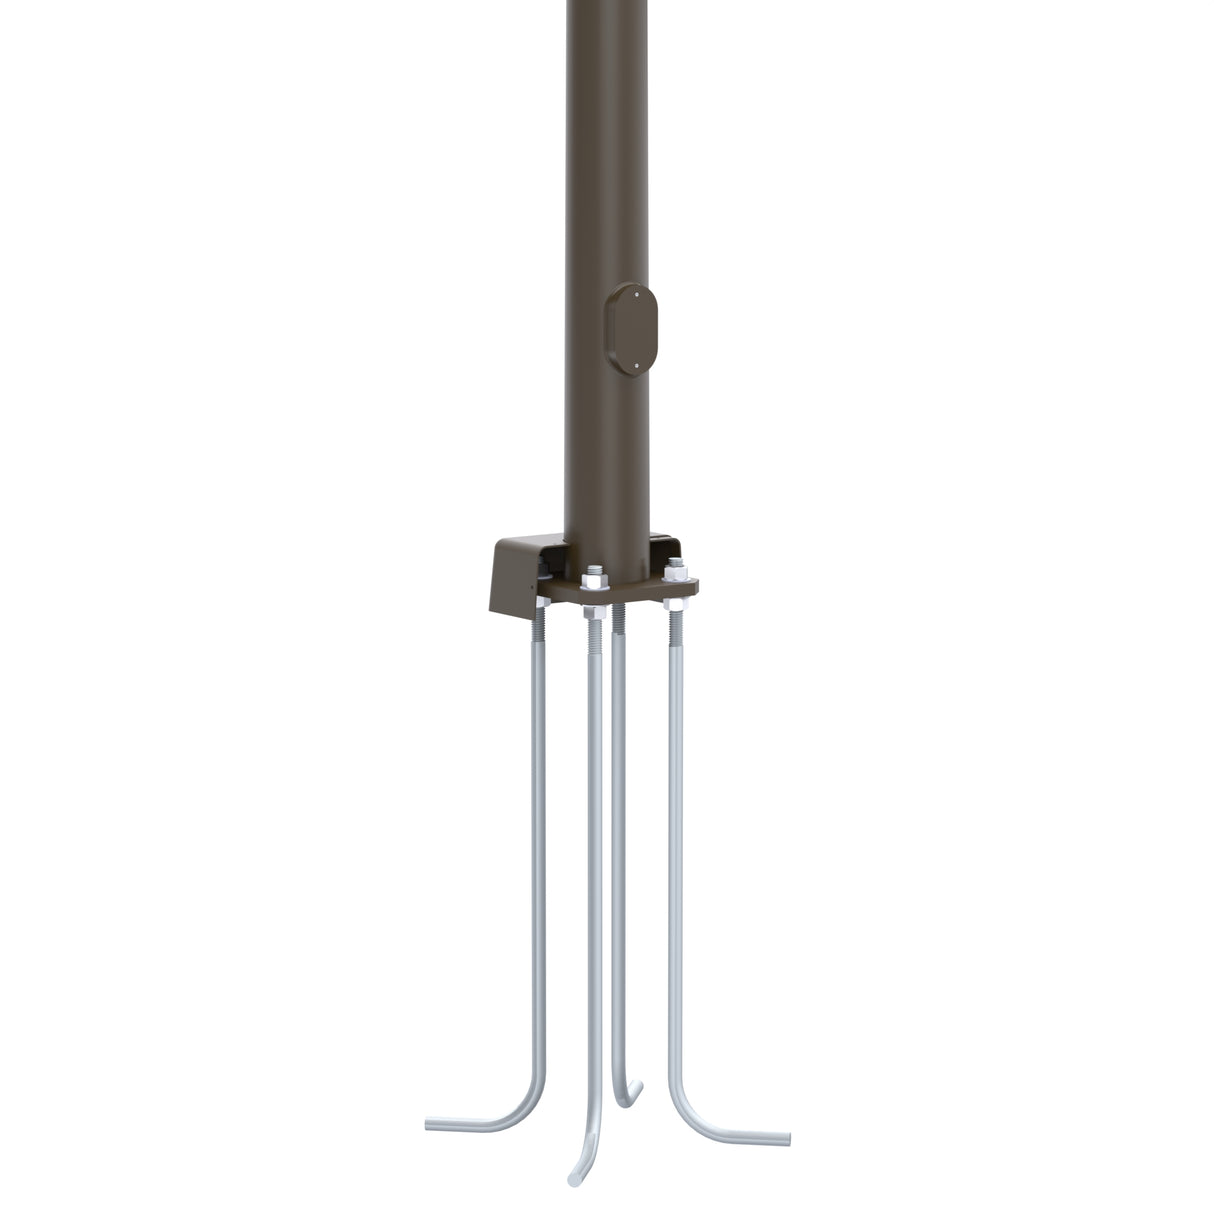 39' Tall x 9.0" Base OD x 3.6" Top OD x 11ga Thick, Round Tapered Steel, Anchor Base Light Pole